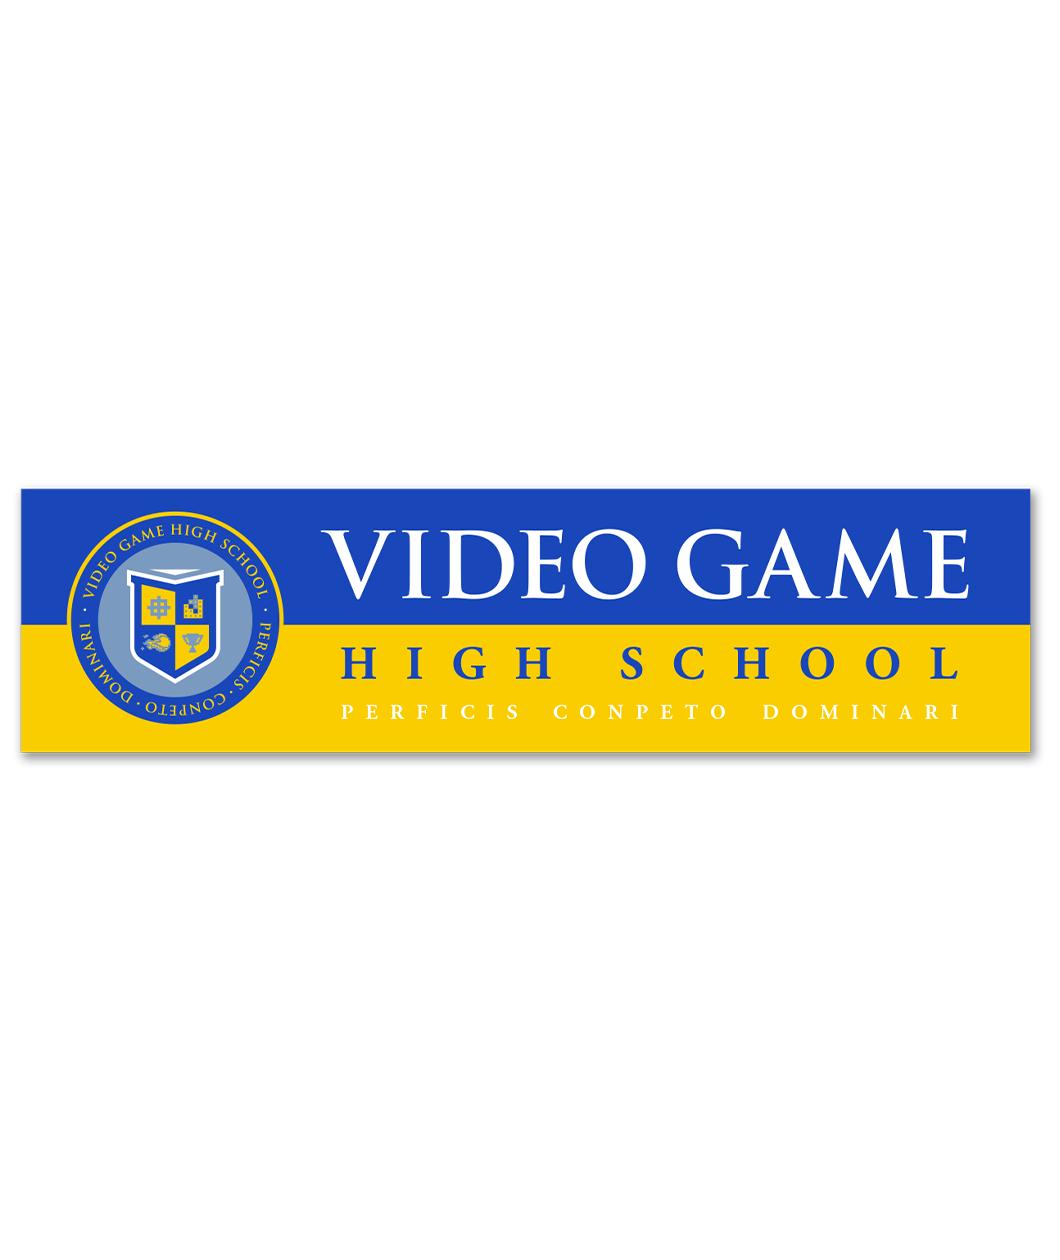 Two tone bumper sticker with royal blue on top and yellow on bottom. Includes VGHS crest on the left in an official circular emblem with large text on the right, "Video Game High School Perficis Conpeto Dominari"